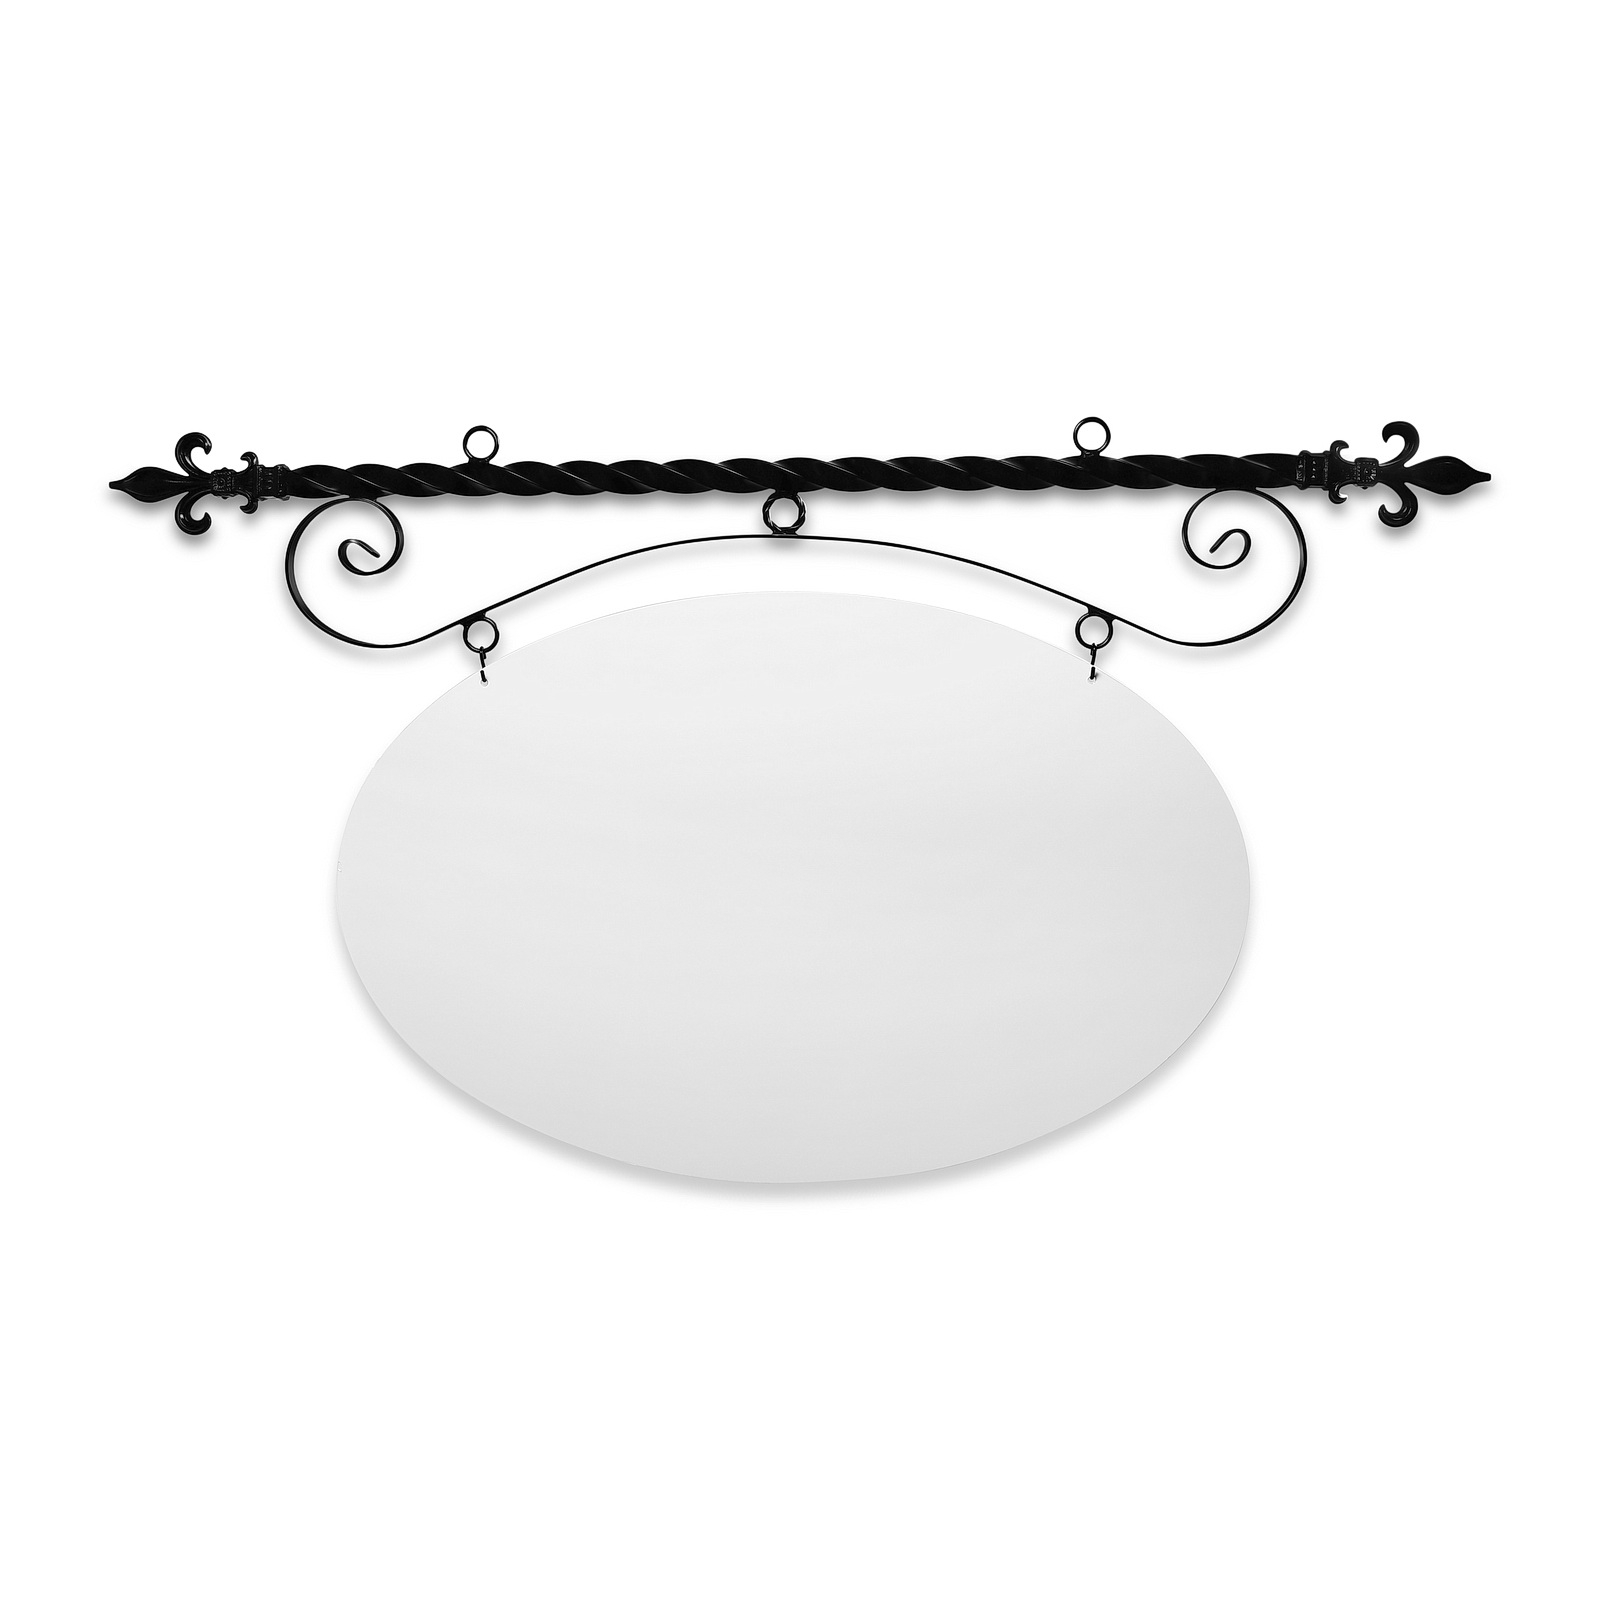 48'' Wide Ceiling Mount Bracket in  Black Powder Coated Steel with 30'' Tall X 46'' Wide X .080'' Thick White Aluminum Sign Blank and 2 Black Powder Coated S-Hooks (Fleur De Lis Finial)